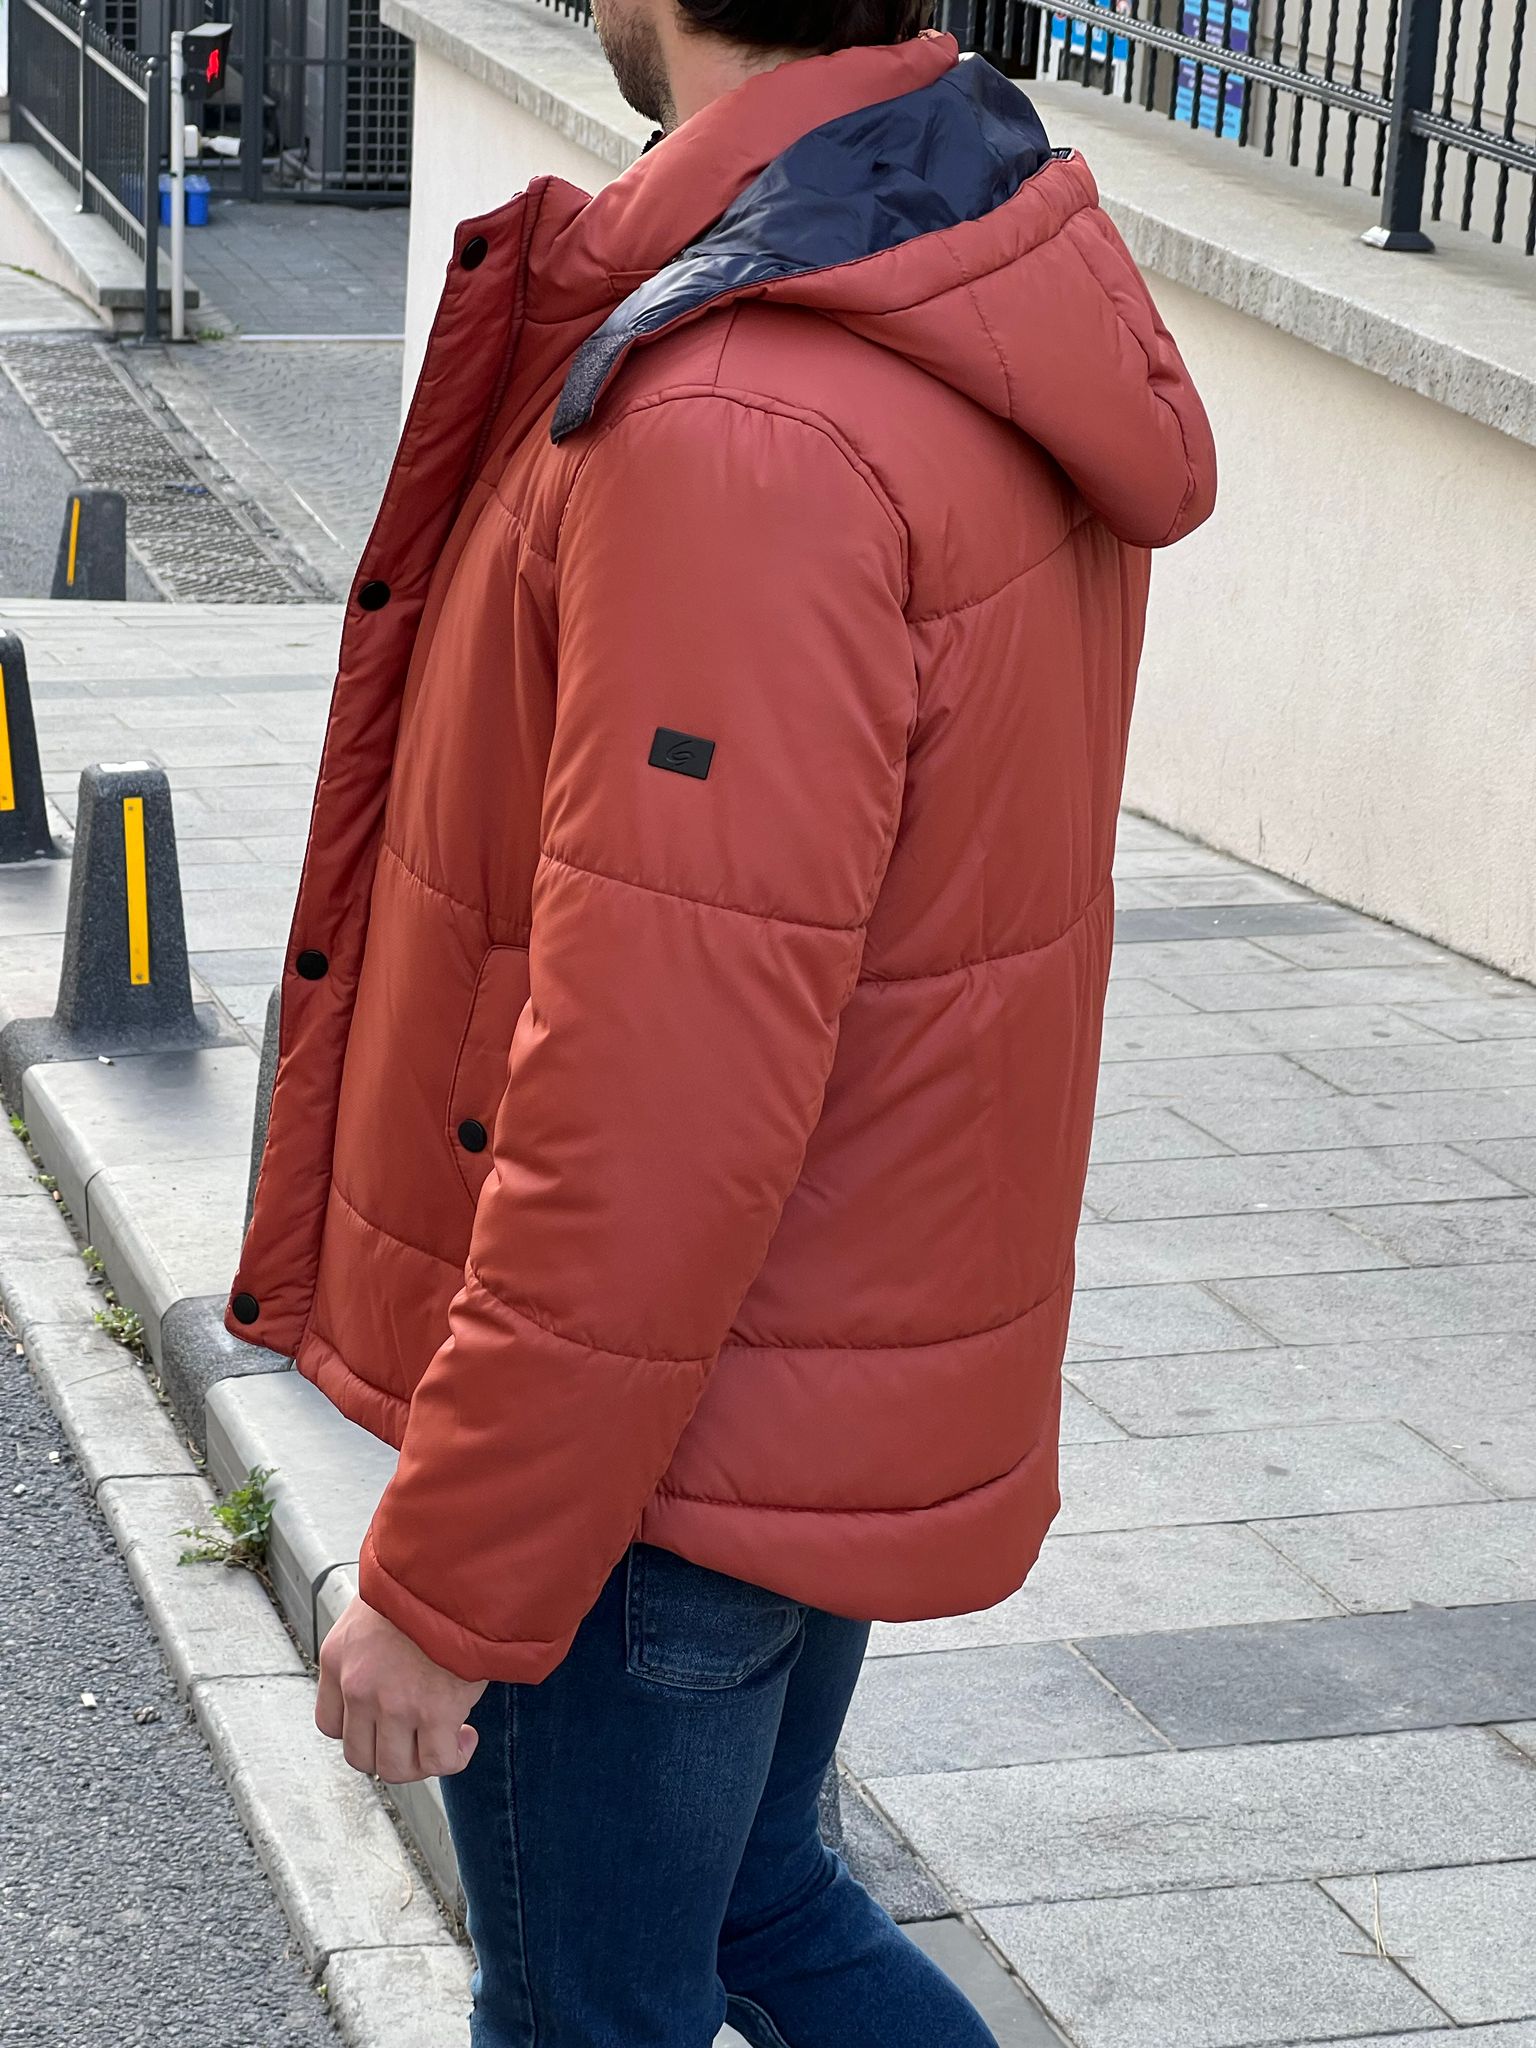 Bold and trendy: our model showcasing an eye-catching orange hooded jacket.